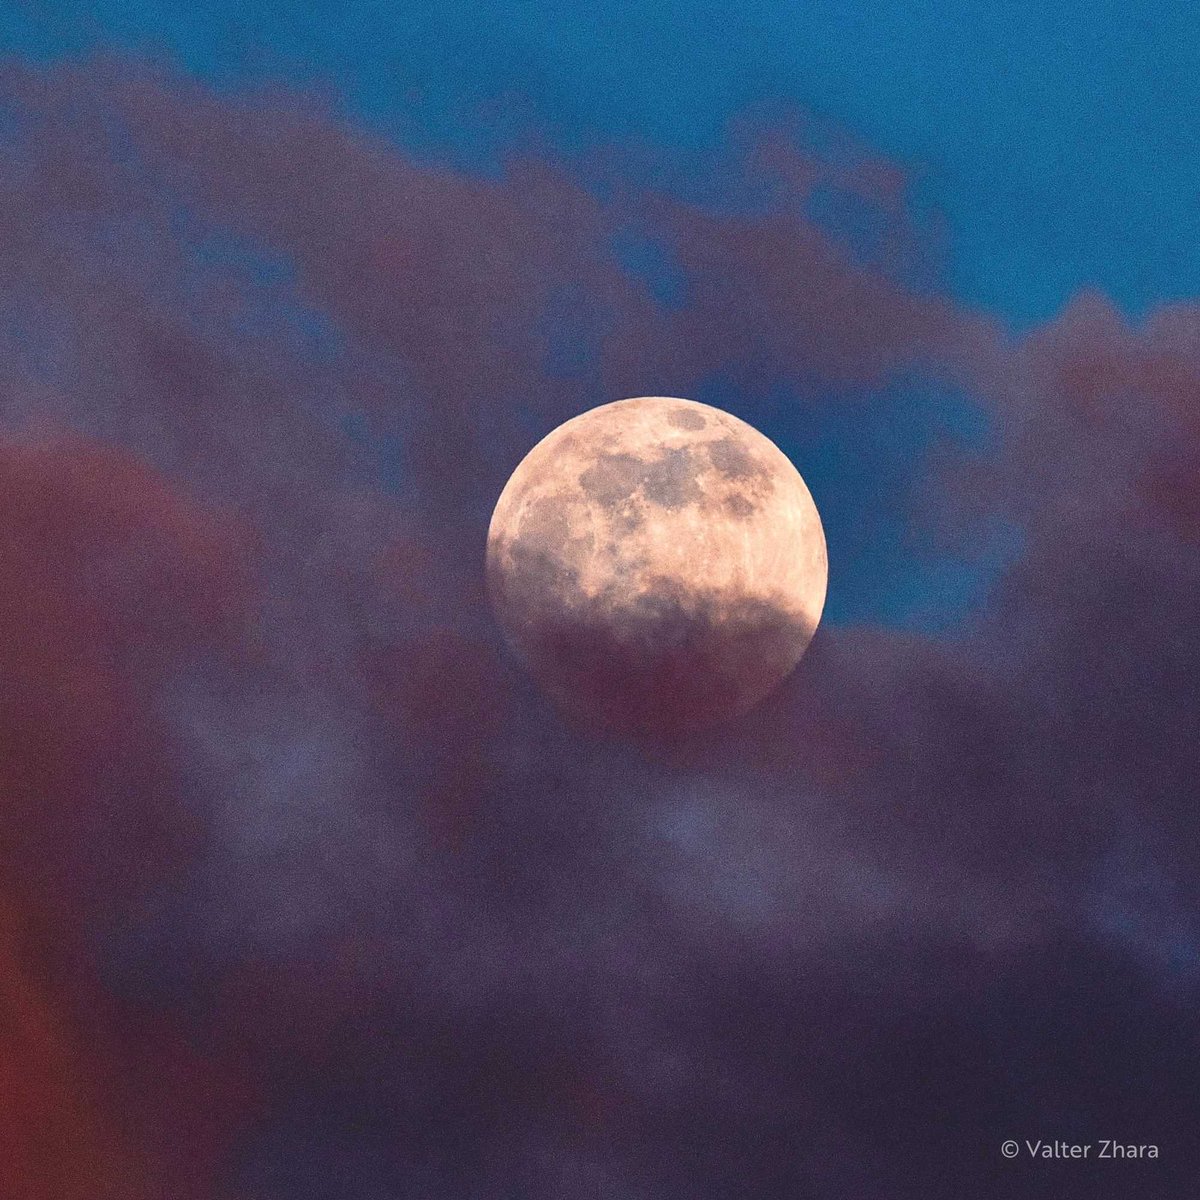 Today brings April's full moon: the Pink Moon! 

It's northern Native-American name celebrates the blooming pink wildflowers of spring. 🌸 

Stargazers could also glimpse the Lyrid meteor shower this week... the oldest meteor shower known to man. 

🌕 Moonrise: 21:37